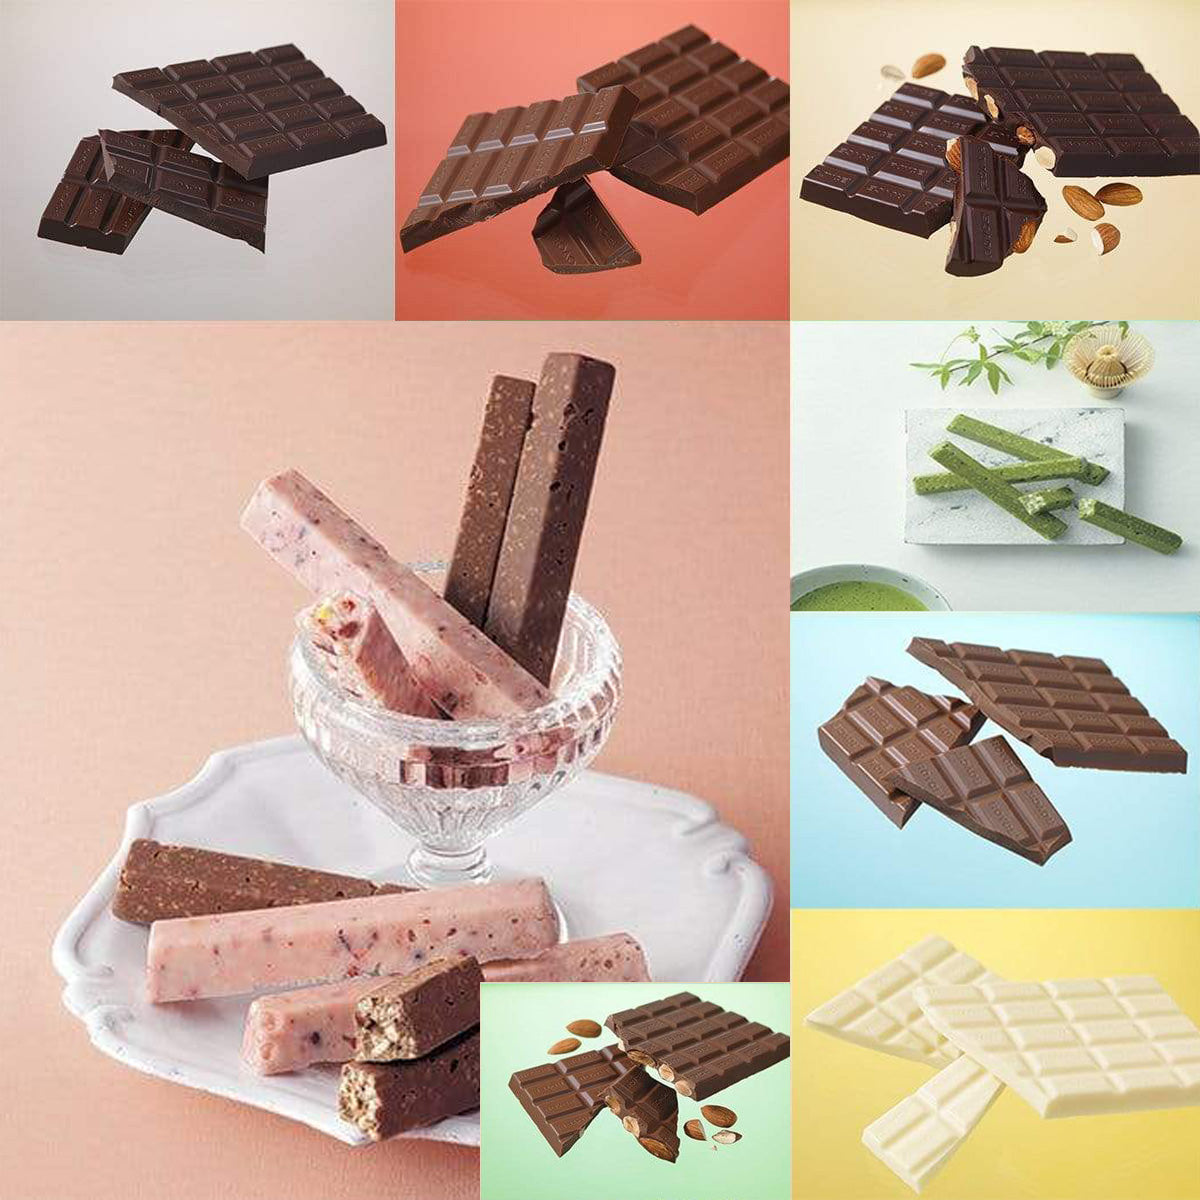 ROYCE' Chocolate - ROYCE' Bar Collection - Clockwise from top: black chocolate bars with gray background; brown chocolate bars with red background; brown chocolate bars with almonds & light brown background; green chocolate bars on white plate with green leaves & tea mixer & cup; brown chocolate bars with light blue background; white chocolate bars with yellow background; brown chocolate bars with almonds & green background; & brown & pink chocolate bars with white plate & clear glass with pink background.